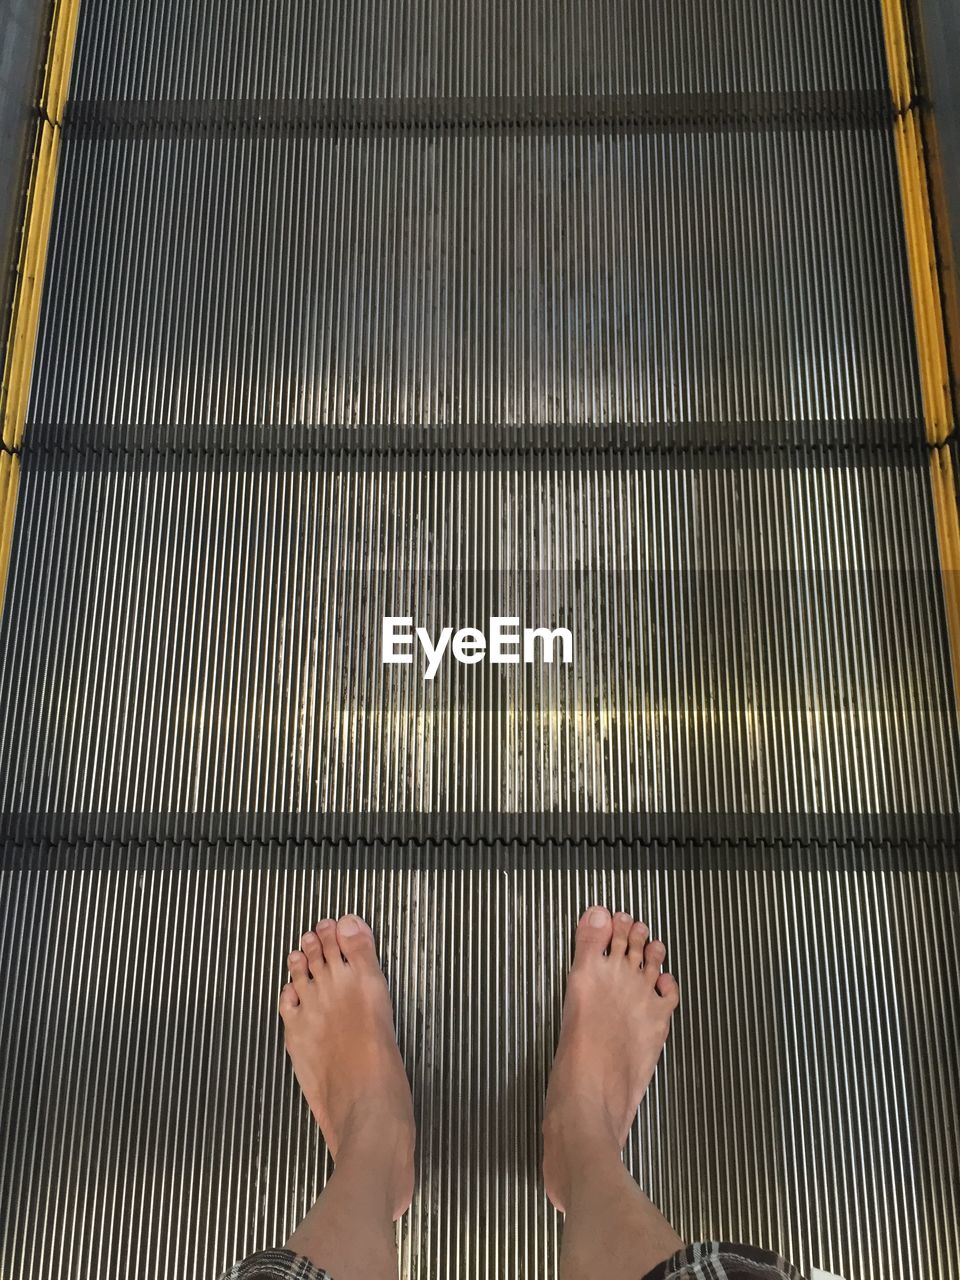 LOW SECTION OF WOMAN STANDING ON ESCALATOR